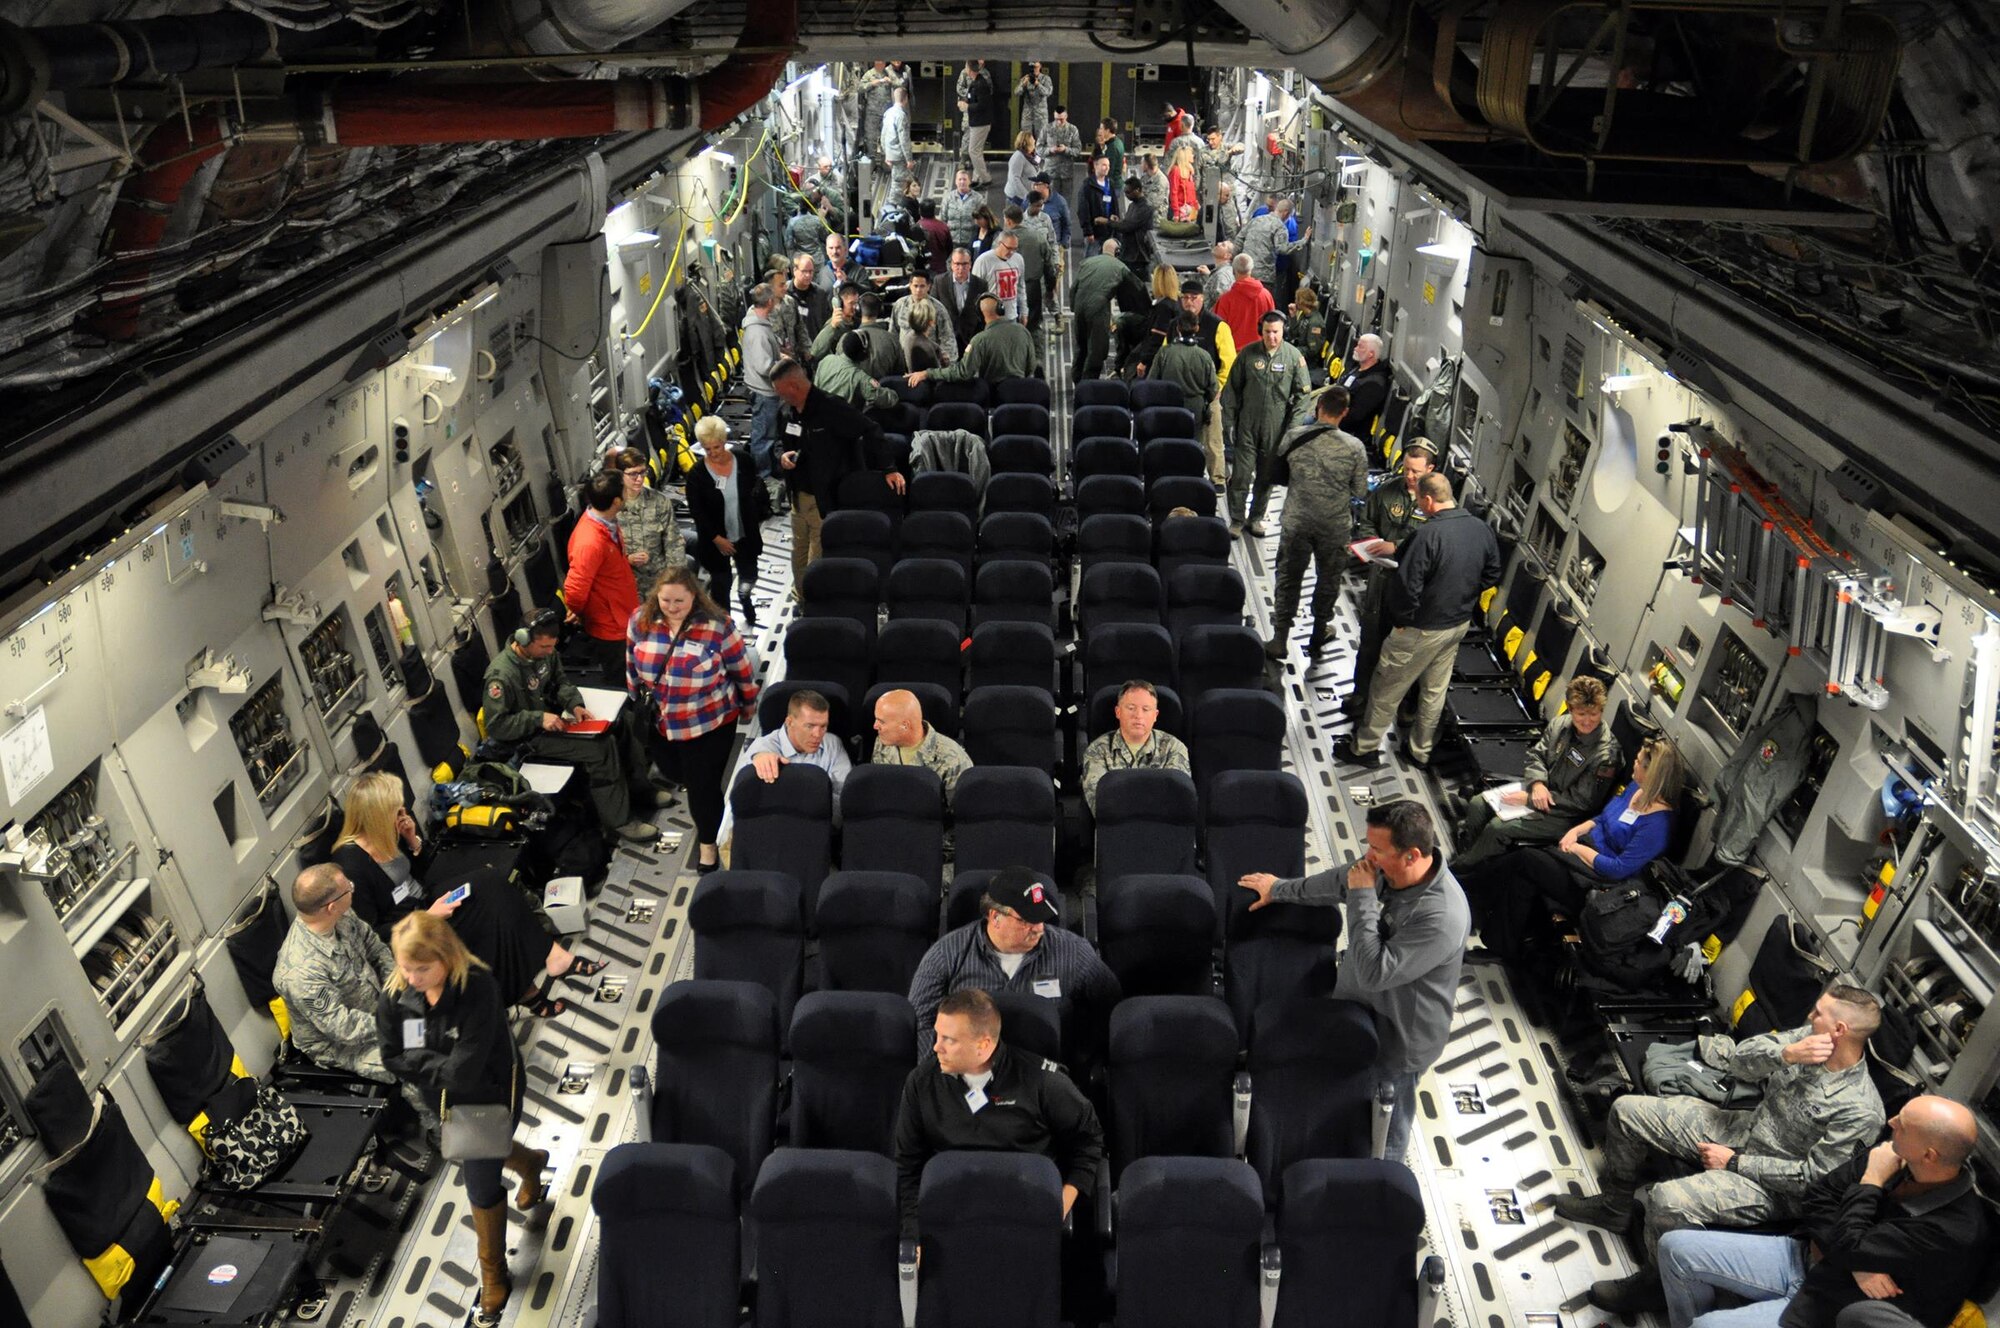 Employers participating in the 445th Airlift Wing Employers Day Nov. 5, 2016 fly in a C-17 Globemaster III while the 445th Aeromedical Evacuation Squadron perform a demonstration on board. Approximately 70 employers and 35 reservists enjoyed breakfast and lunch, received a flight, participated in tours and demonstrations of the different jobs and training that their Air Force Reserve employees do when performing military service. The employers also received information about the Employer Support of the Guard and Reserve program. (U.S. Air Force photo/Staff Sgt. Rachel Ingram)